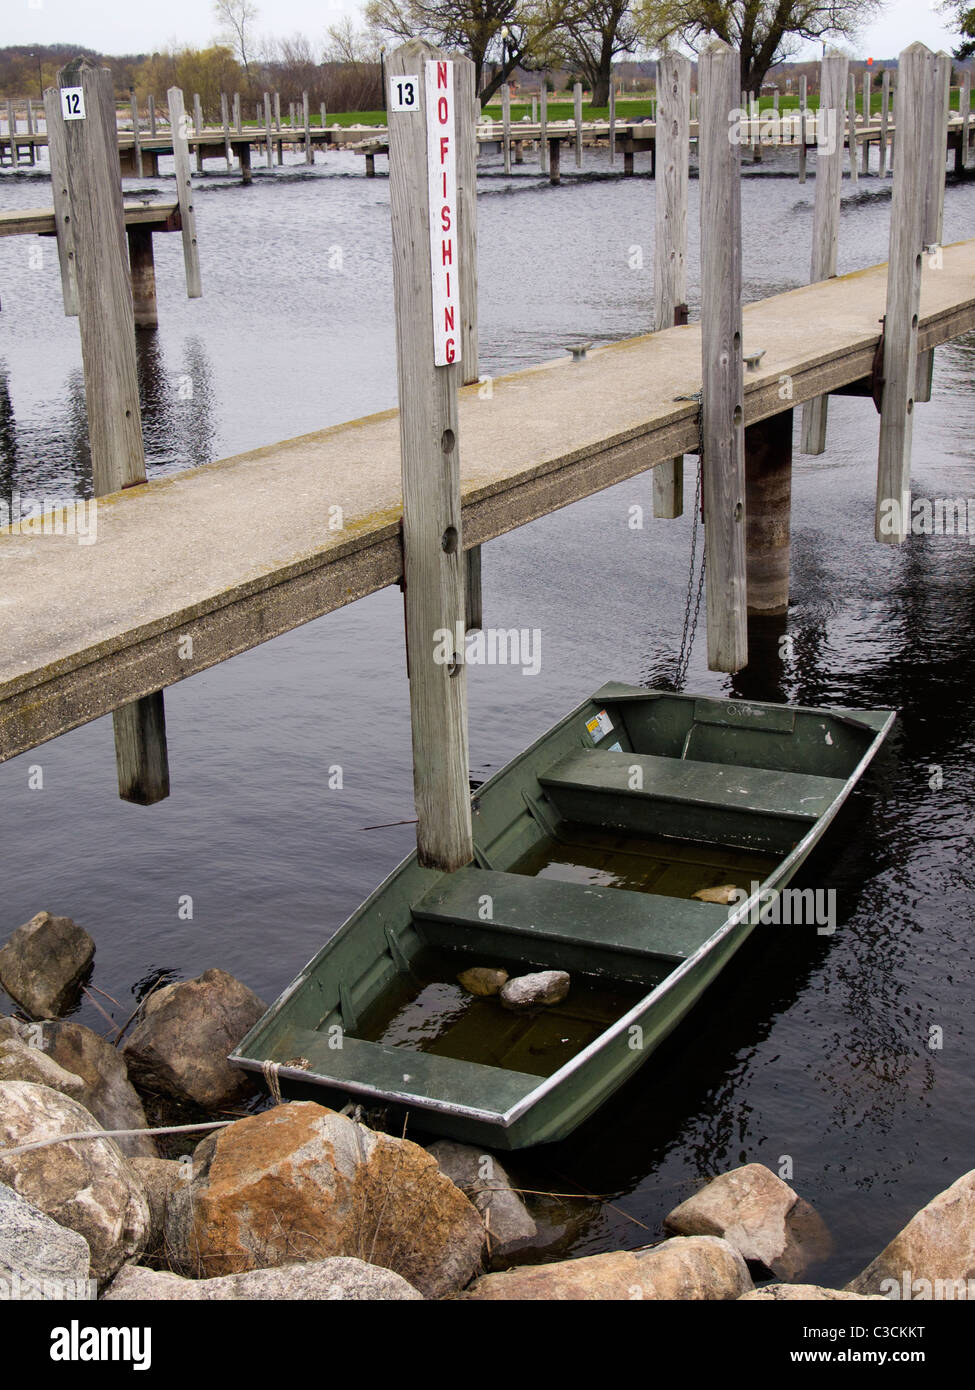 Water filled John Boat moored at public marina in Whitehall, Michigan. Overcast, bleak, spring day. Stock Photo